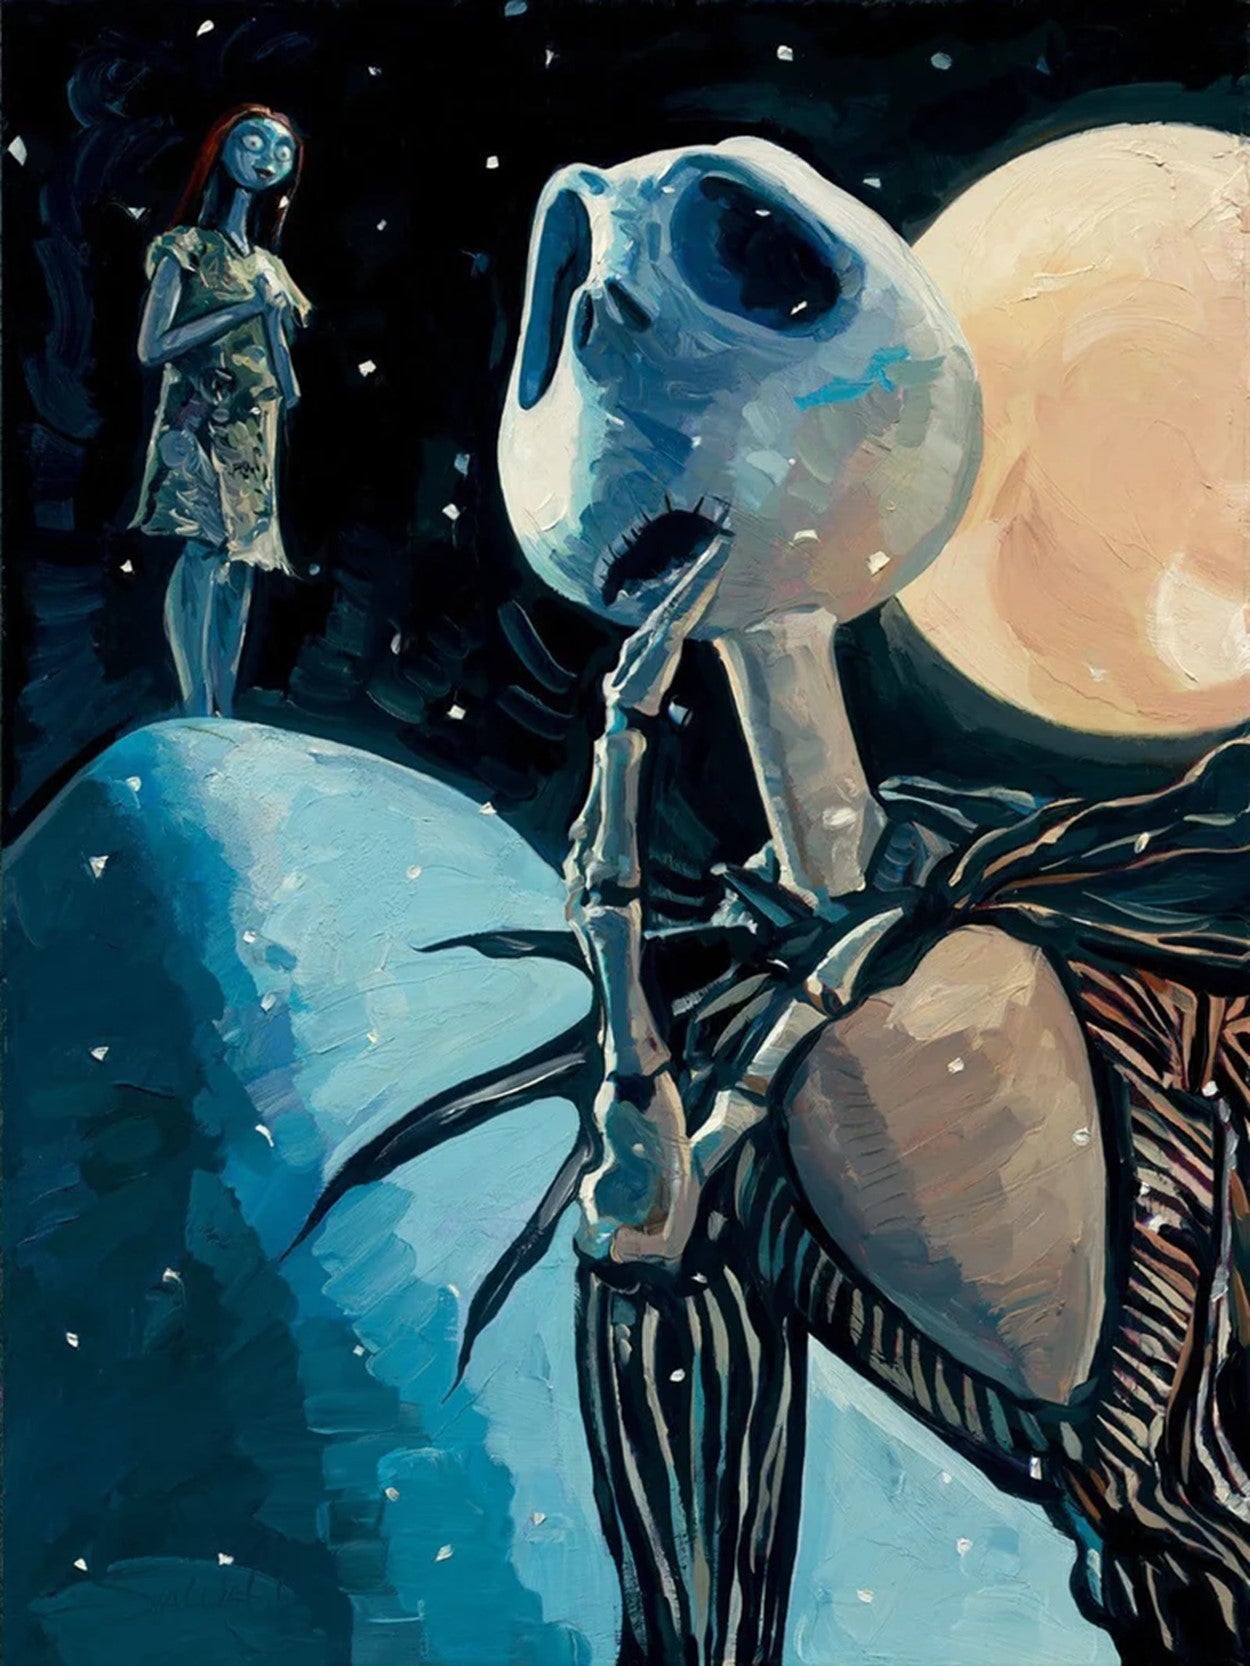 We're Simply Meant To Be by Jim Salvati inspired by The Nightmare Before Christmas